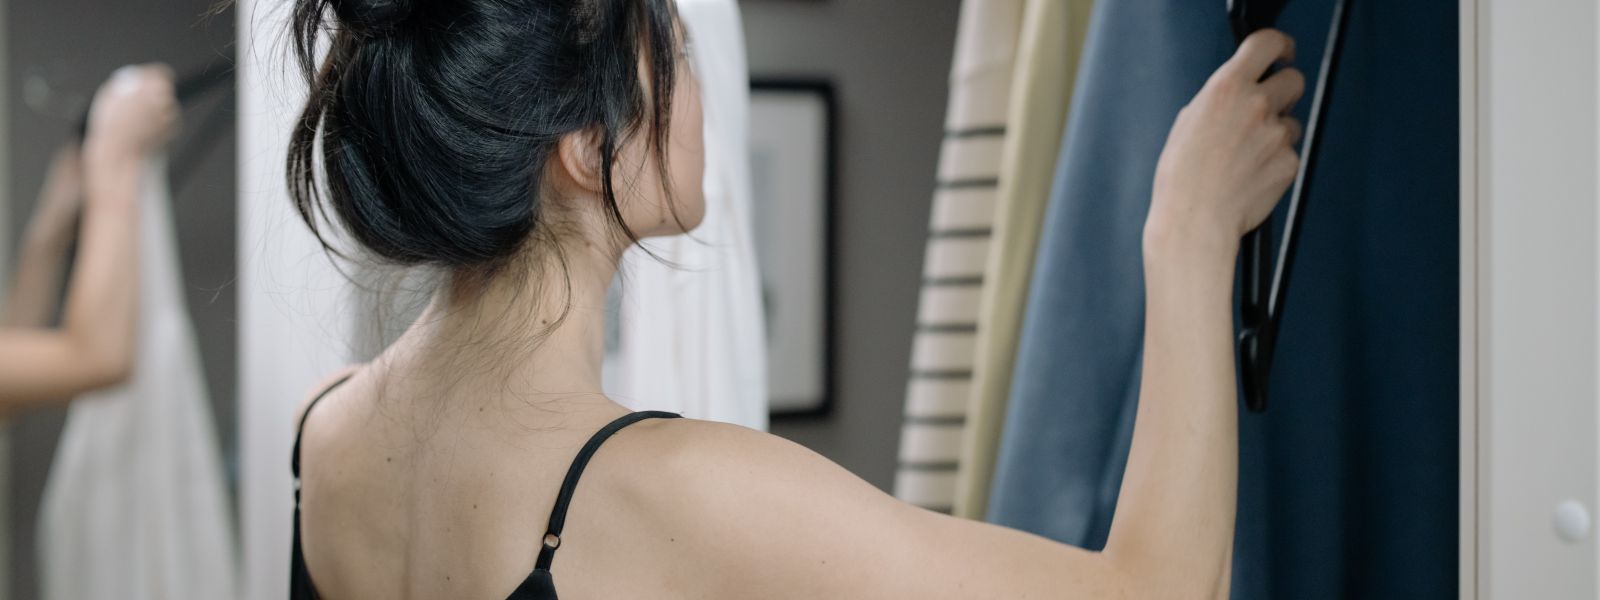 a woman in a black tank top looking at sweater hanging in a closet